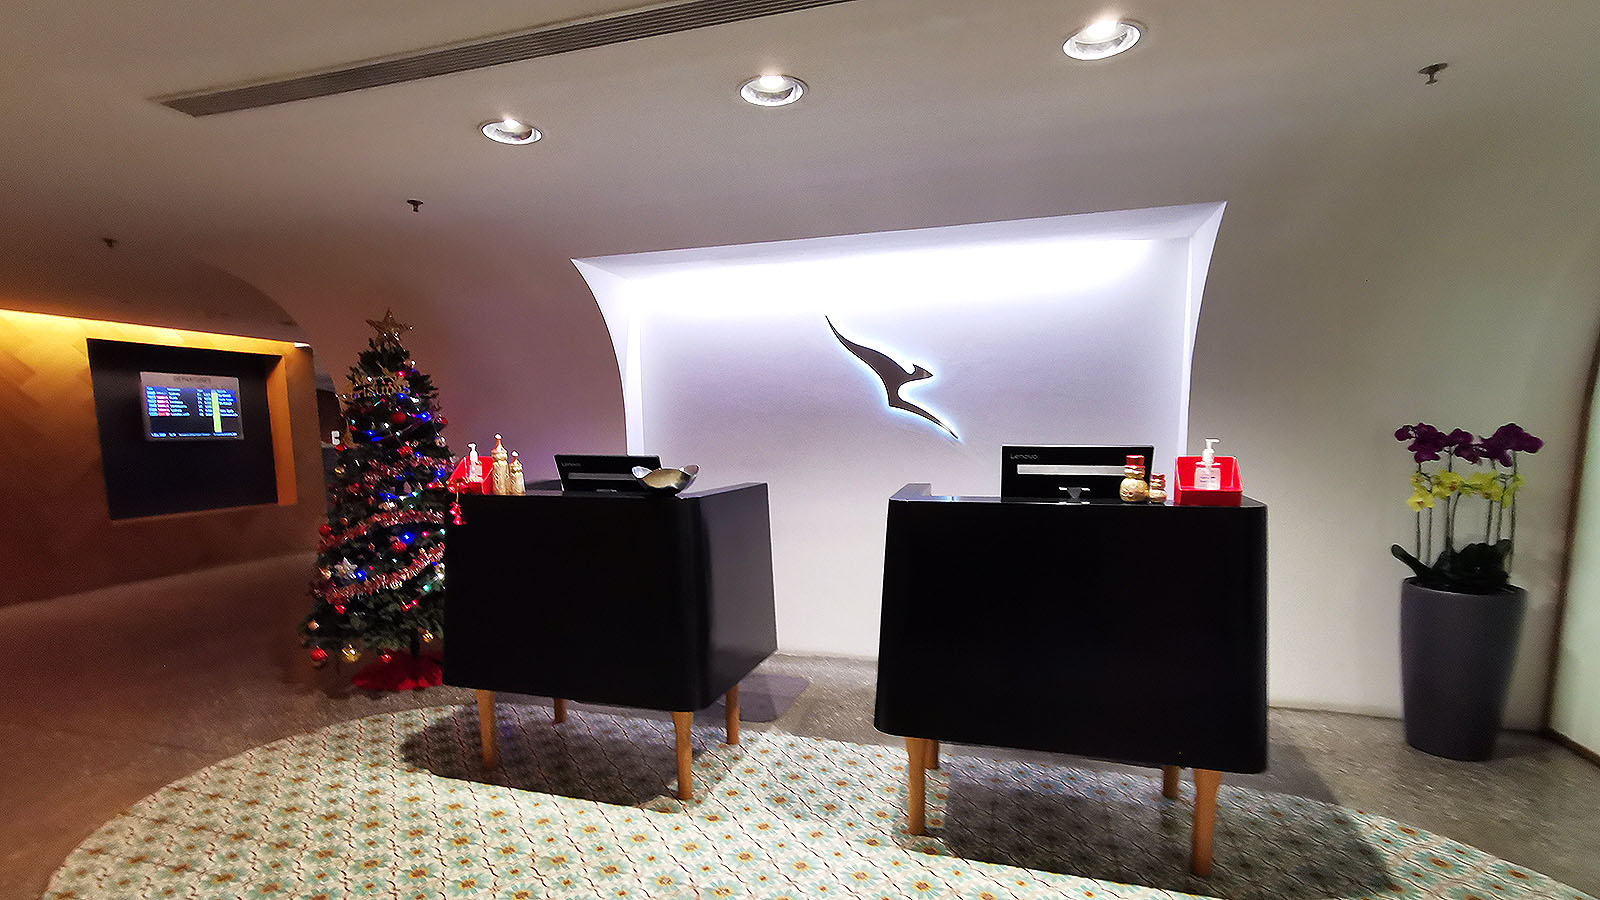 Reception desk at the Qantas International Business Lounge in Singapore